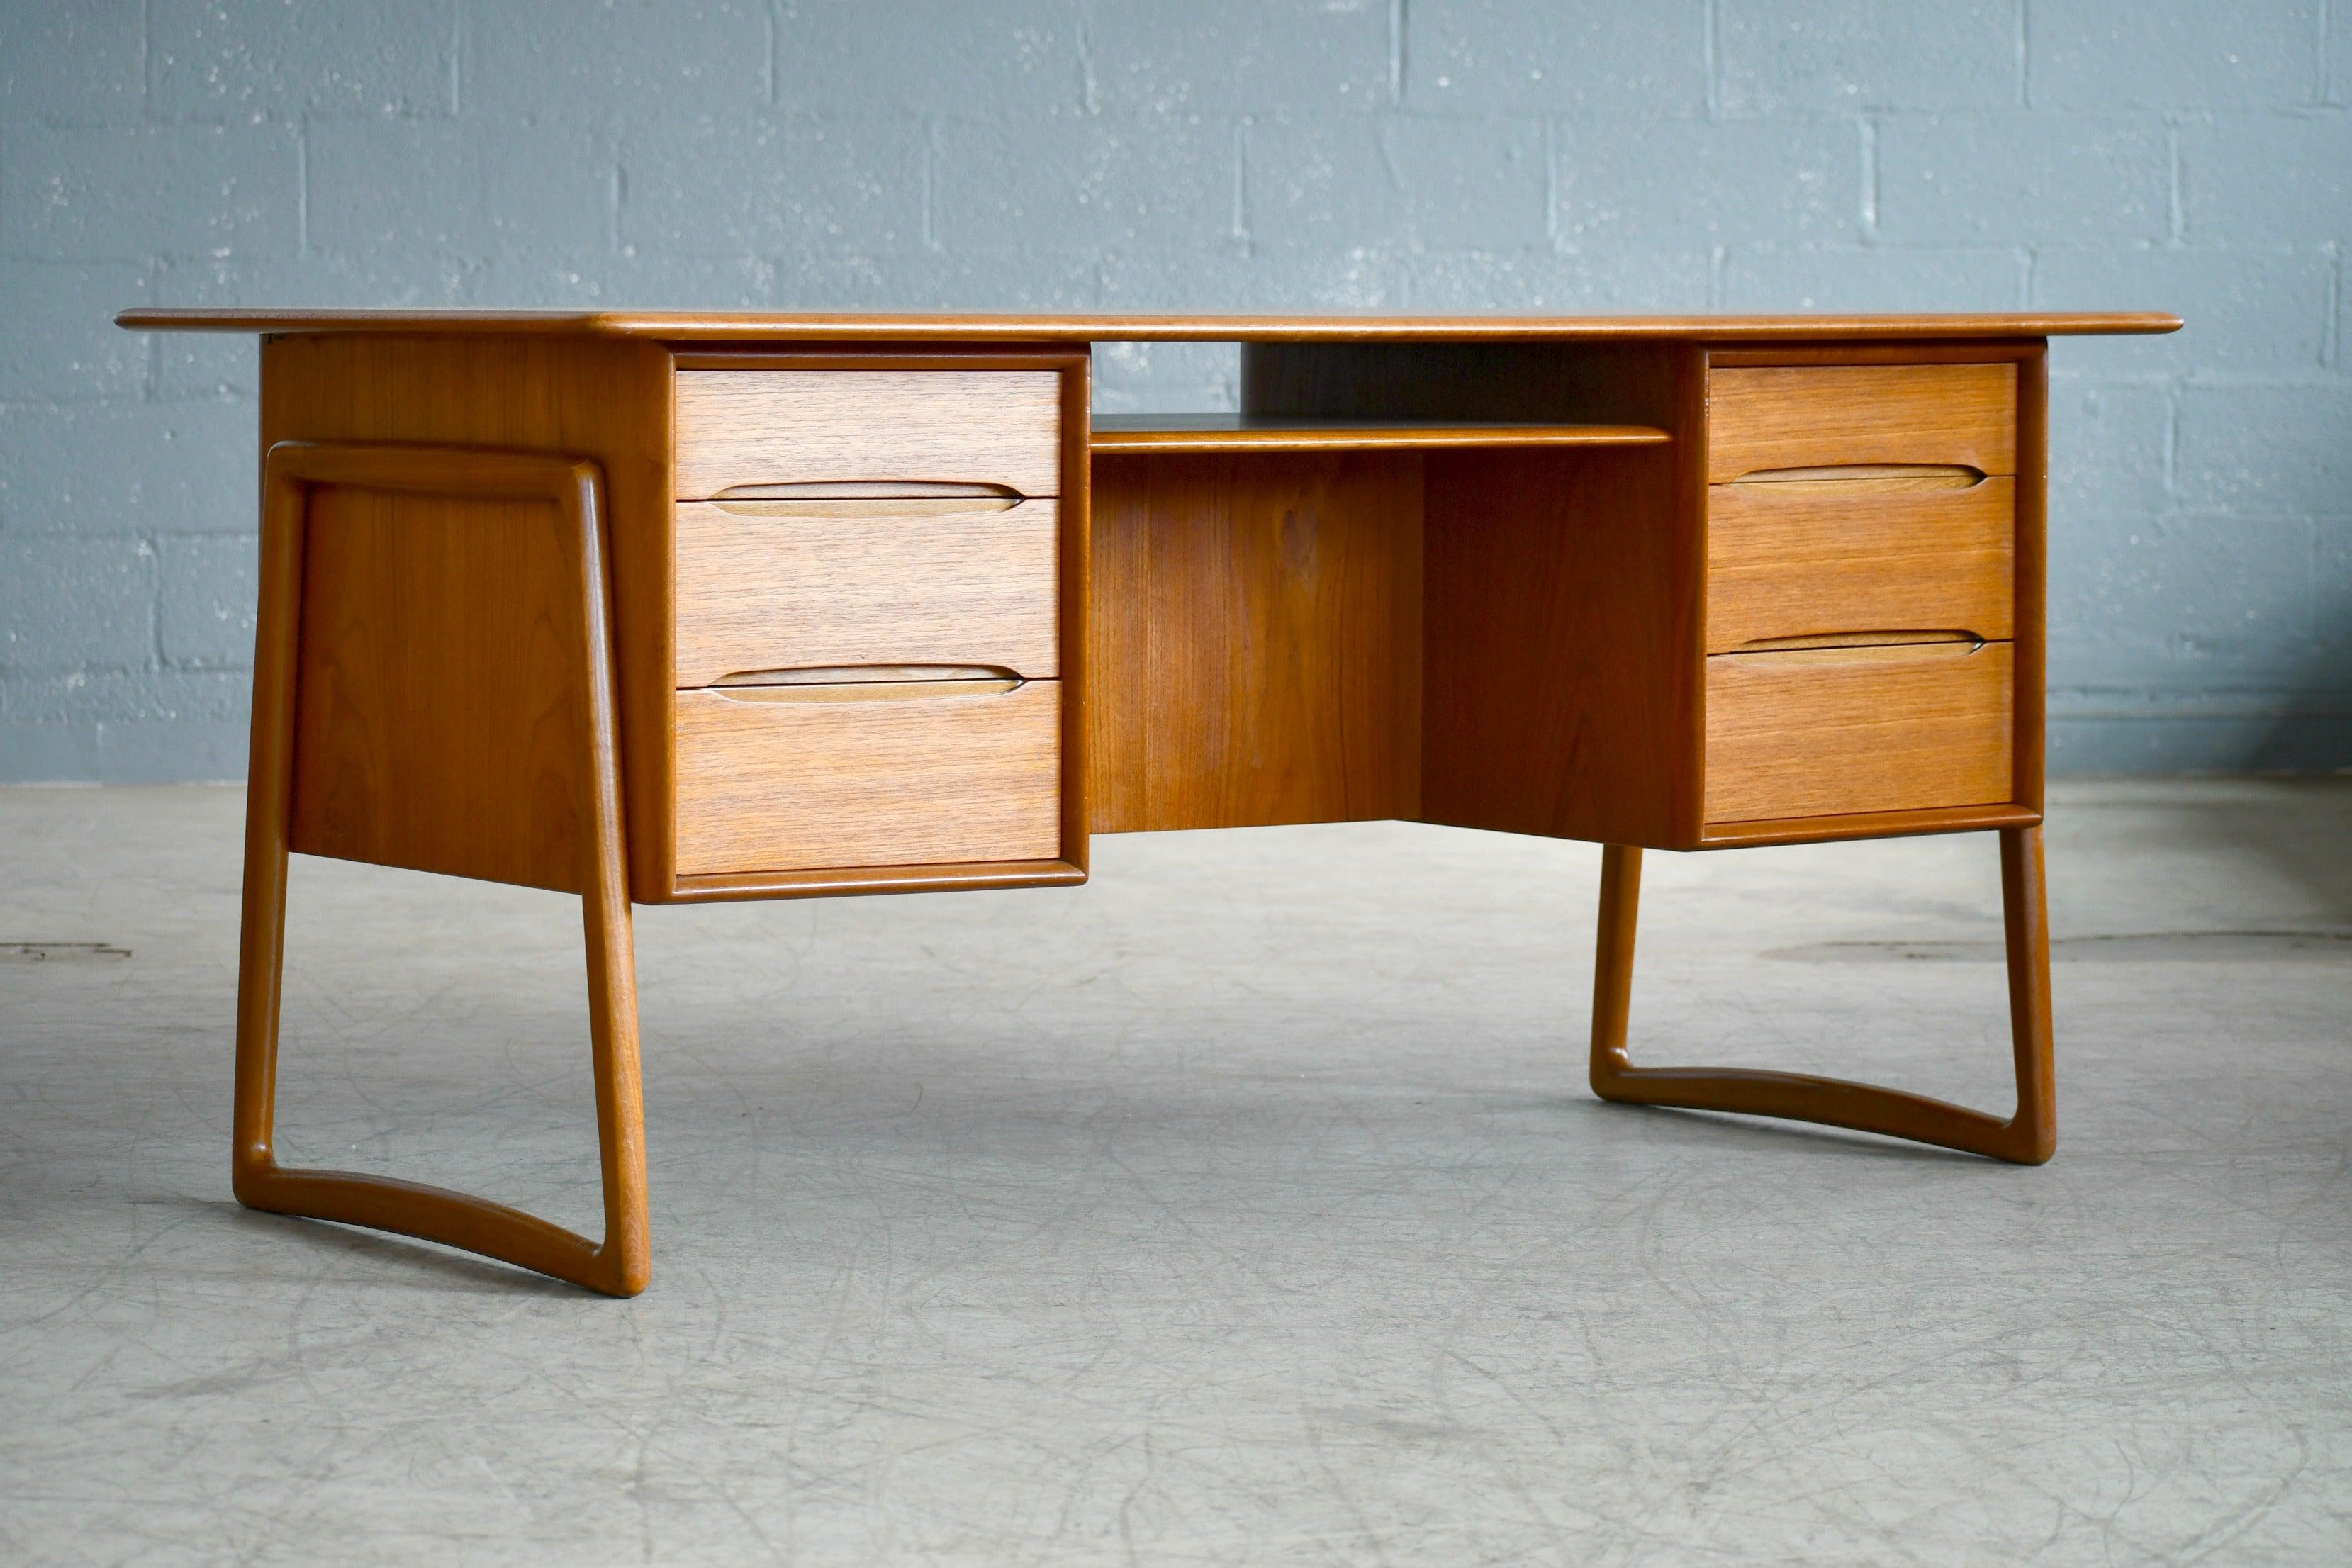 Stunning executive desk designed by architect Svend A. Madsen for Sigurd Hansen Møbelfabrik in Denmark in the 1950s. This iconic design is meticulously crafted in teak wood and is suspended in boomerang legs epitomizing Madsen’s penchant for unique